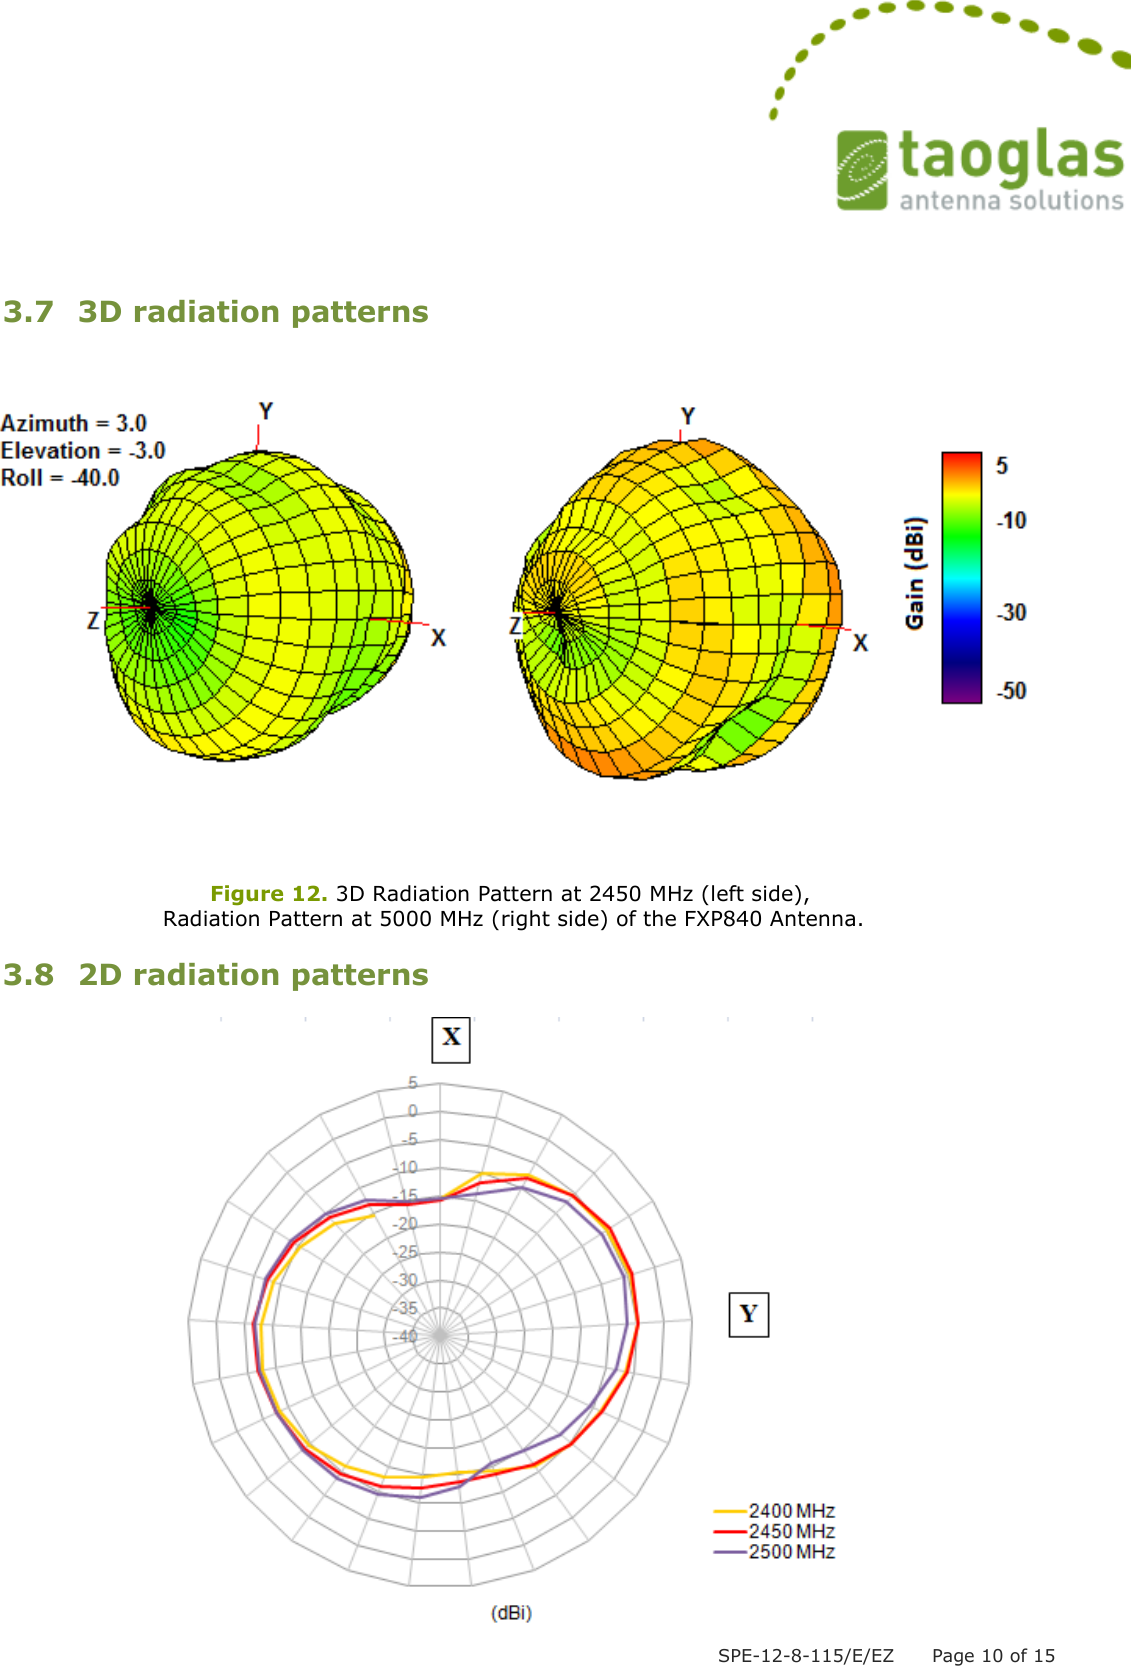  SPE-12-8-115/E/EZ      Page 10 of 15  3.7 3D radiation patterns     Figure 12. 3D Radiation Pattern at 2450 MHz (left side),  Radiation Pattern at 5000 MHz (right side) of the FXP840 Antenna.  3.8 2D radiation patterns   